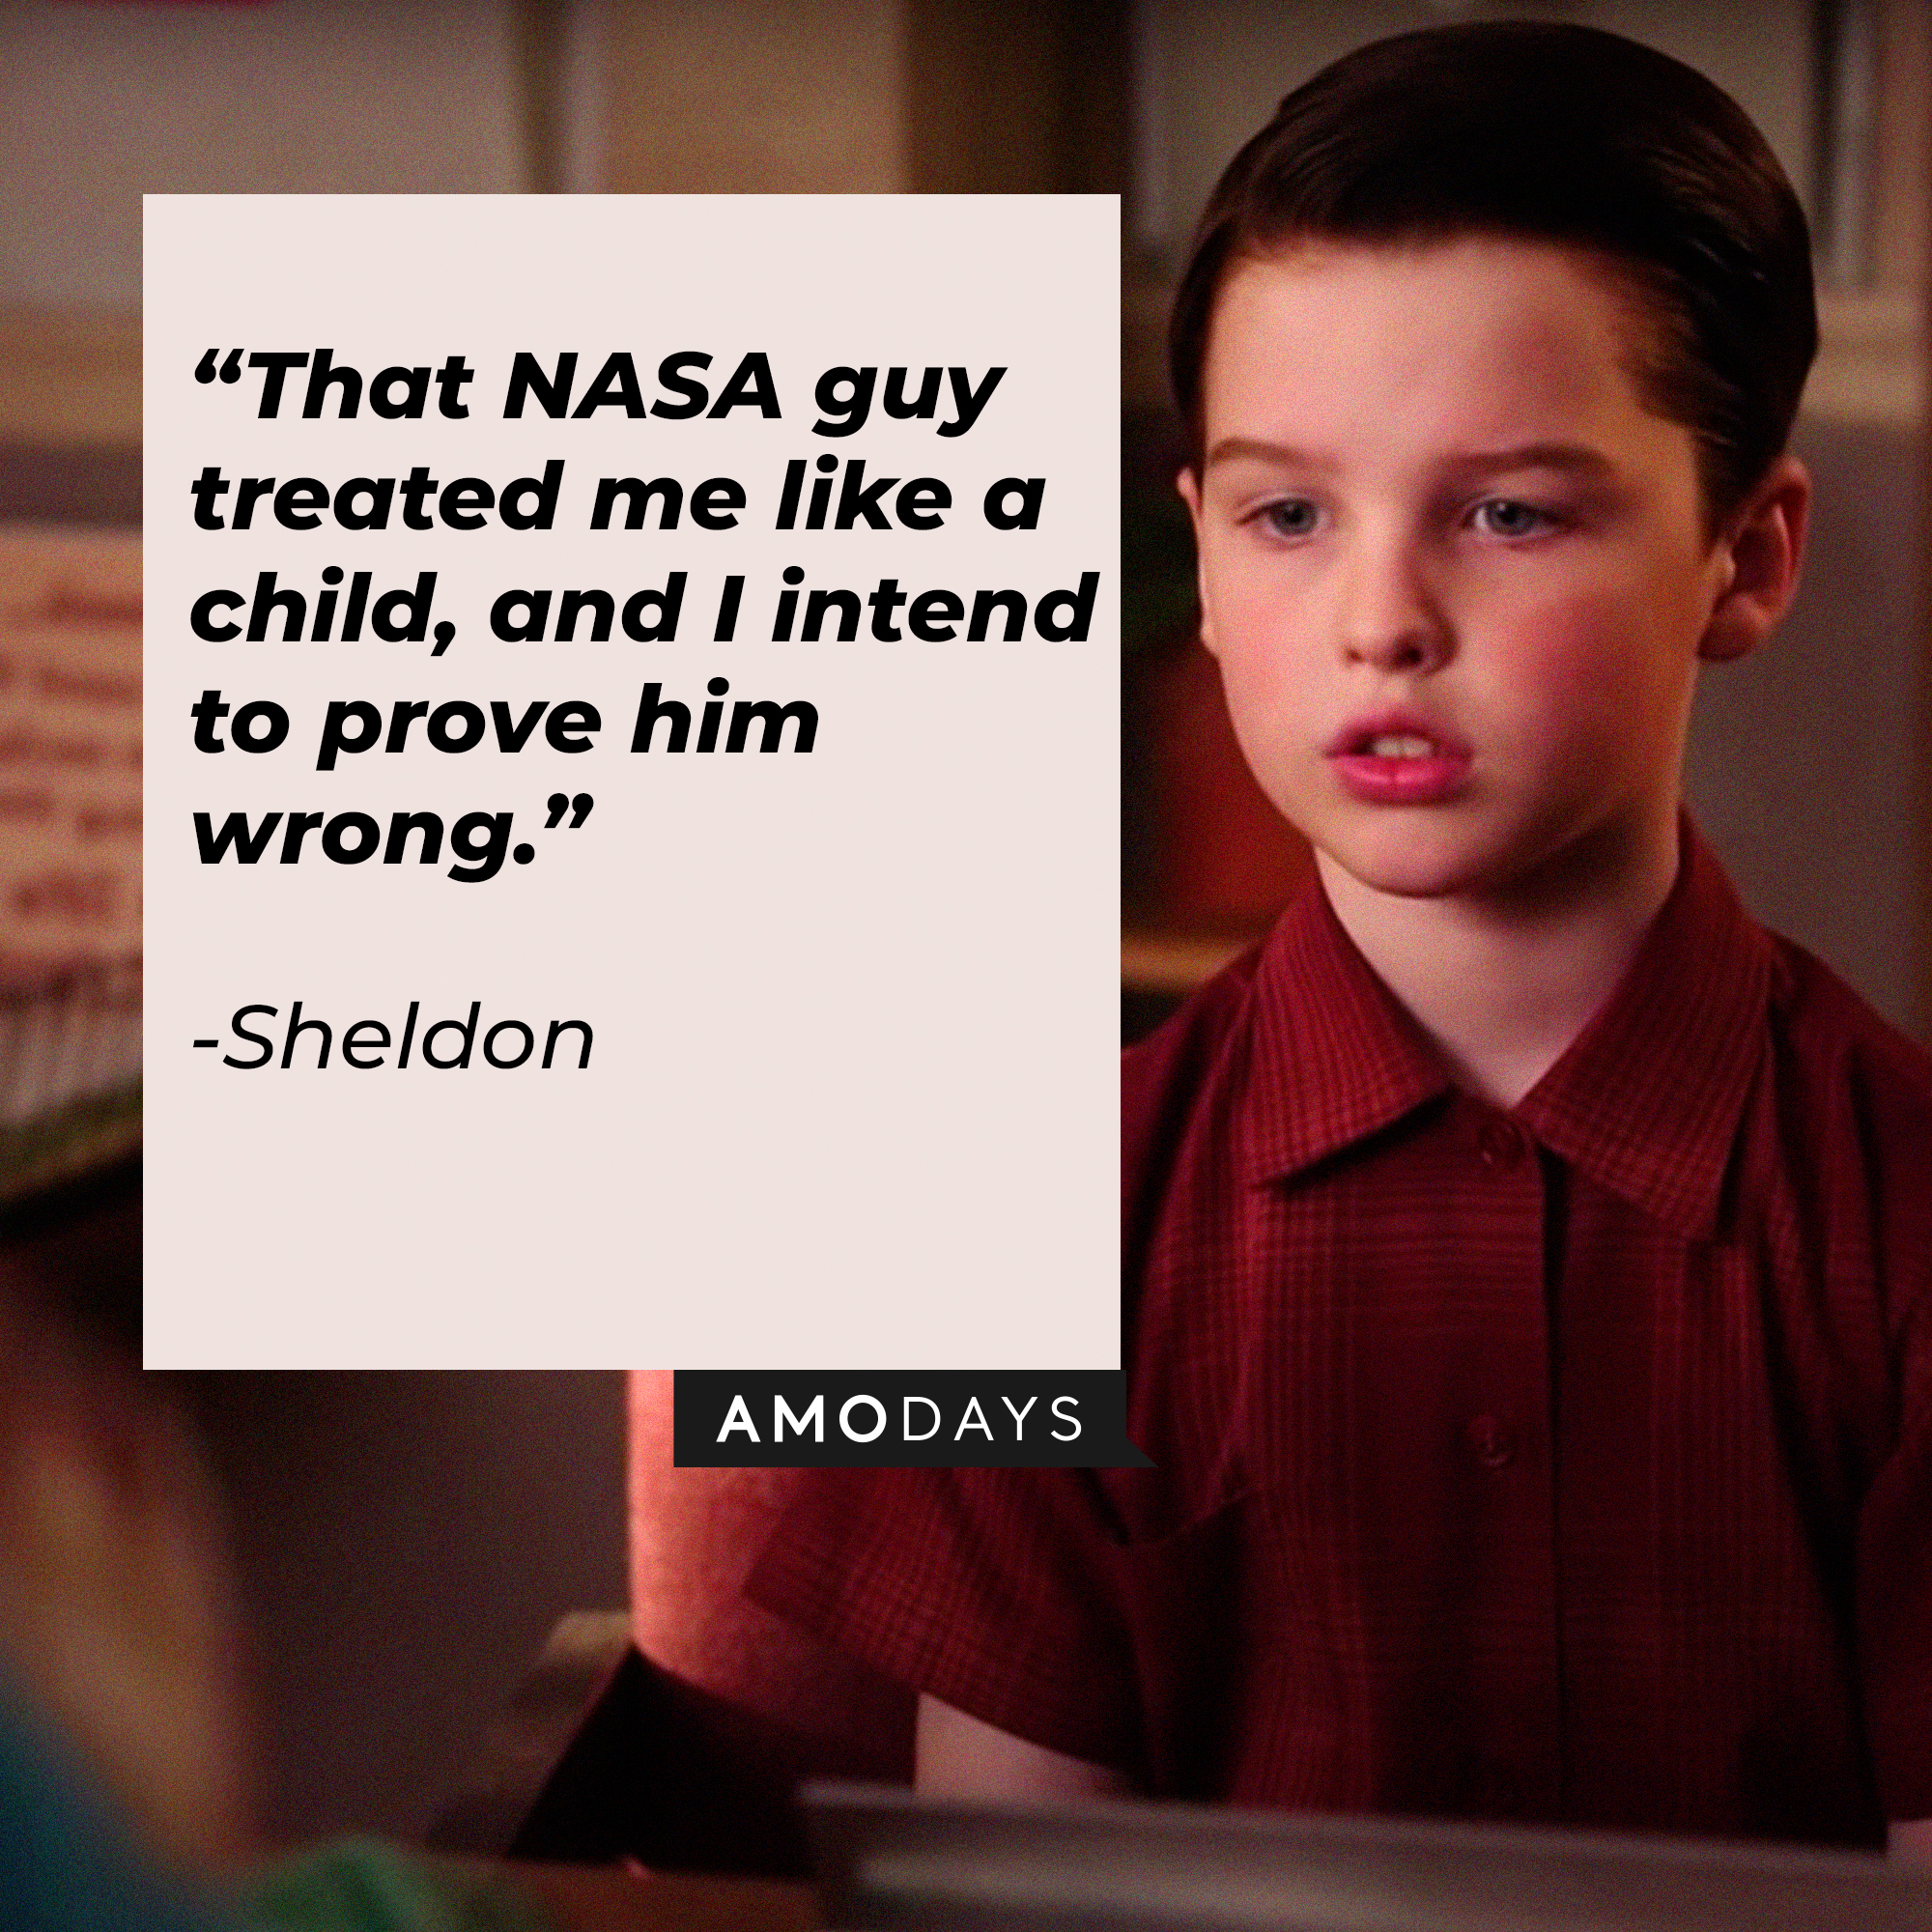 Sheldon's quote: “That NASA guy treated me like a child, and I intend to prove him wrong.” | Source: facebook.com/YoungSheldonCBS